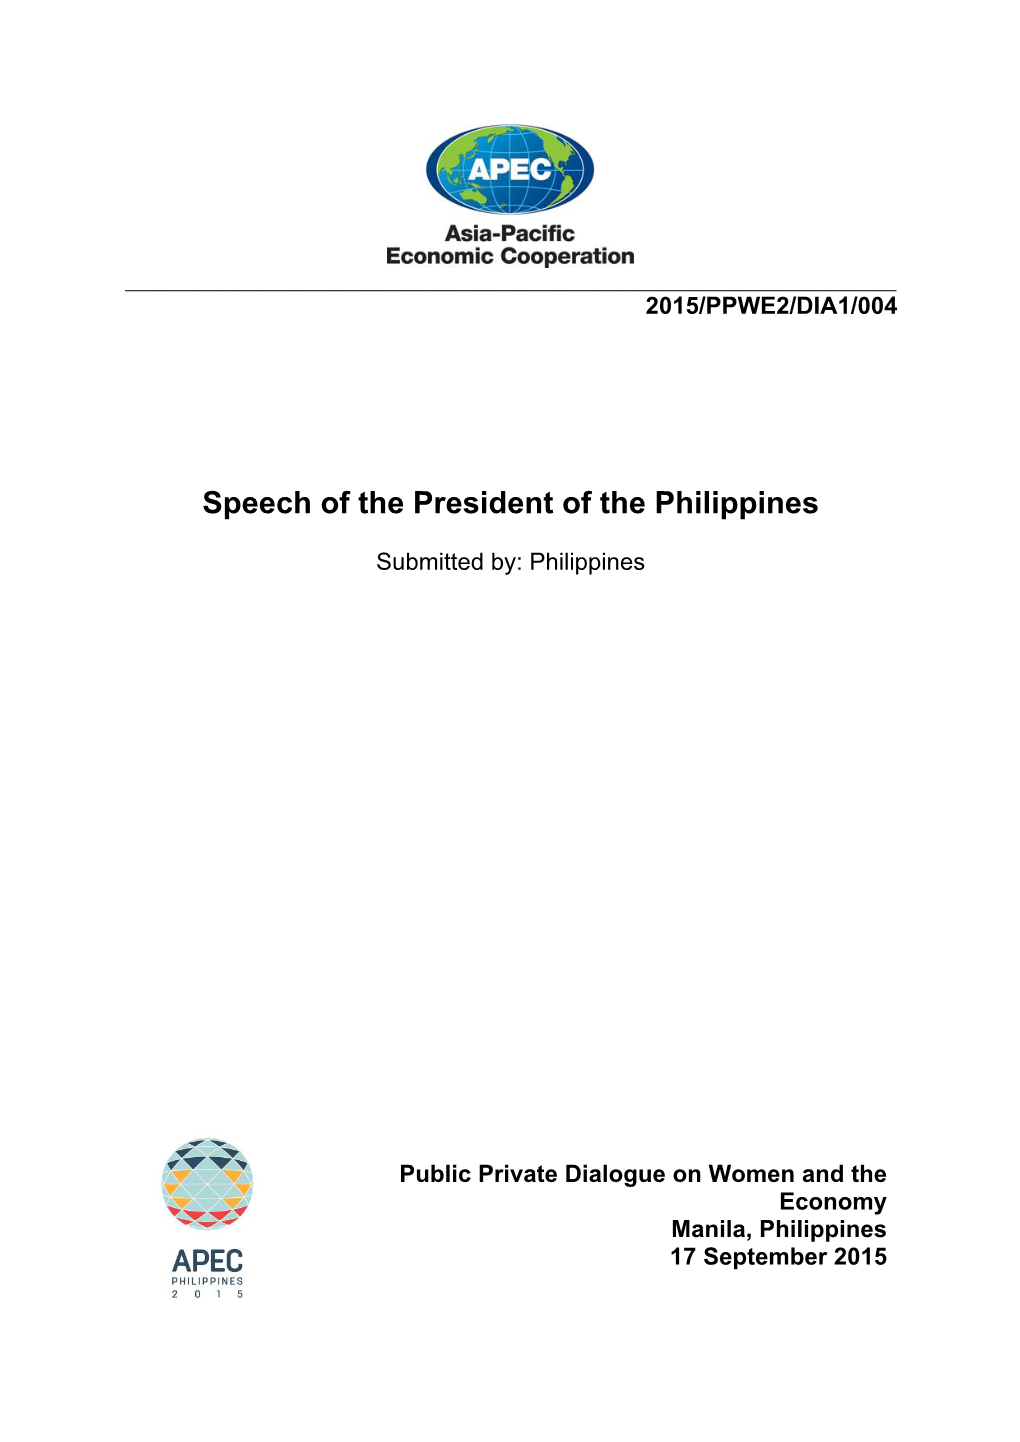 Speech of the President of the Philippines